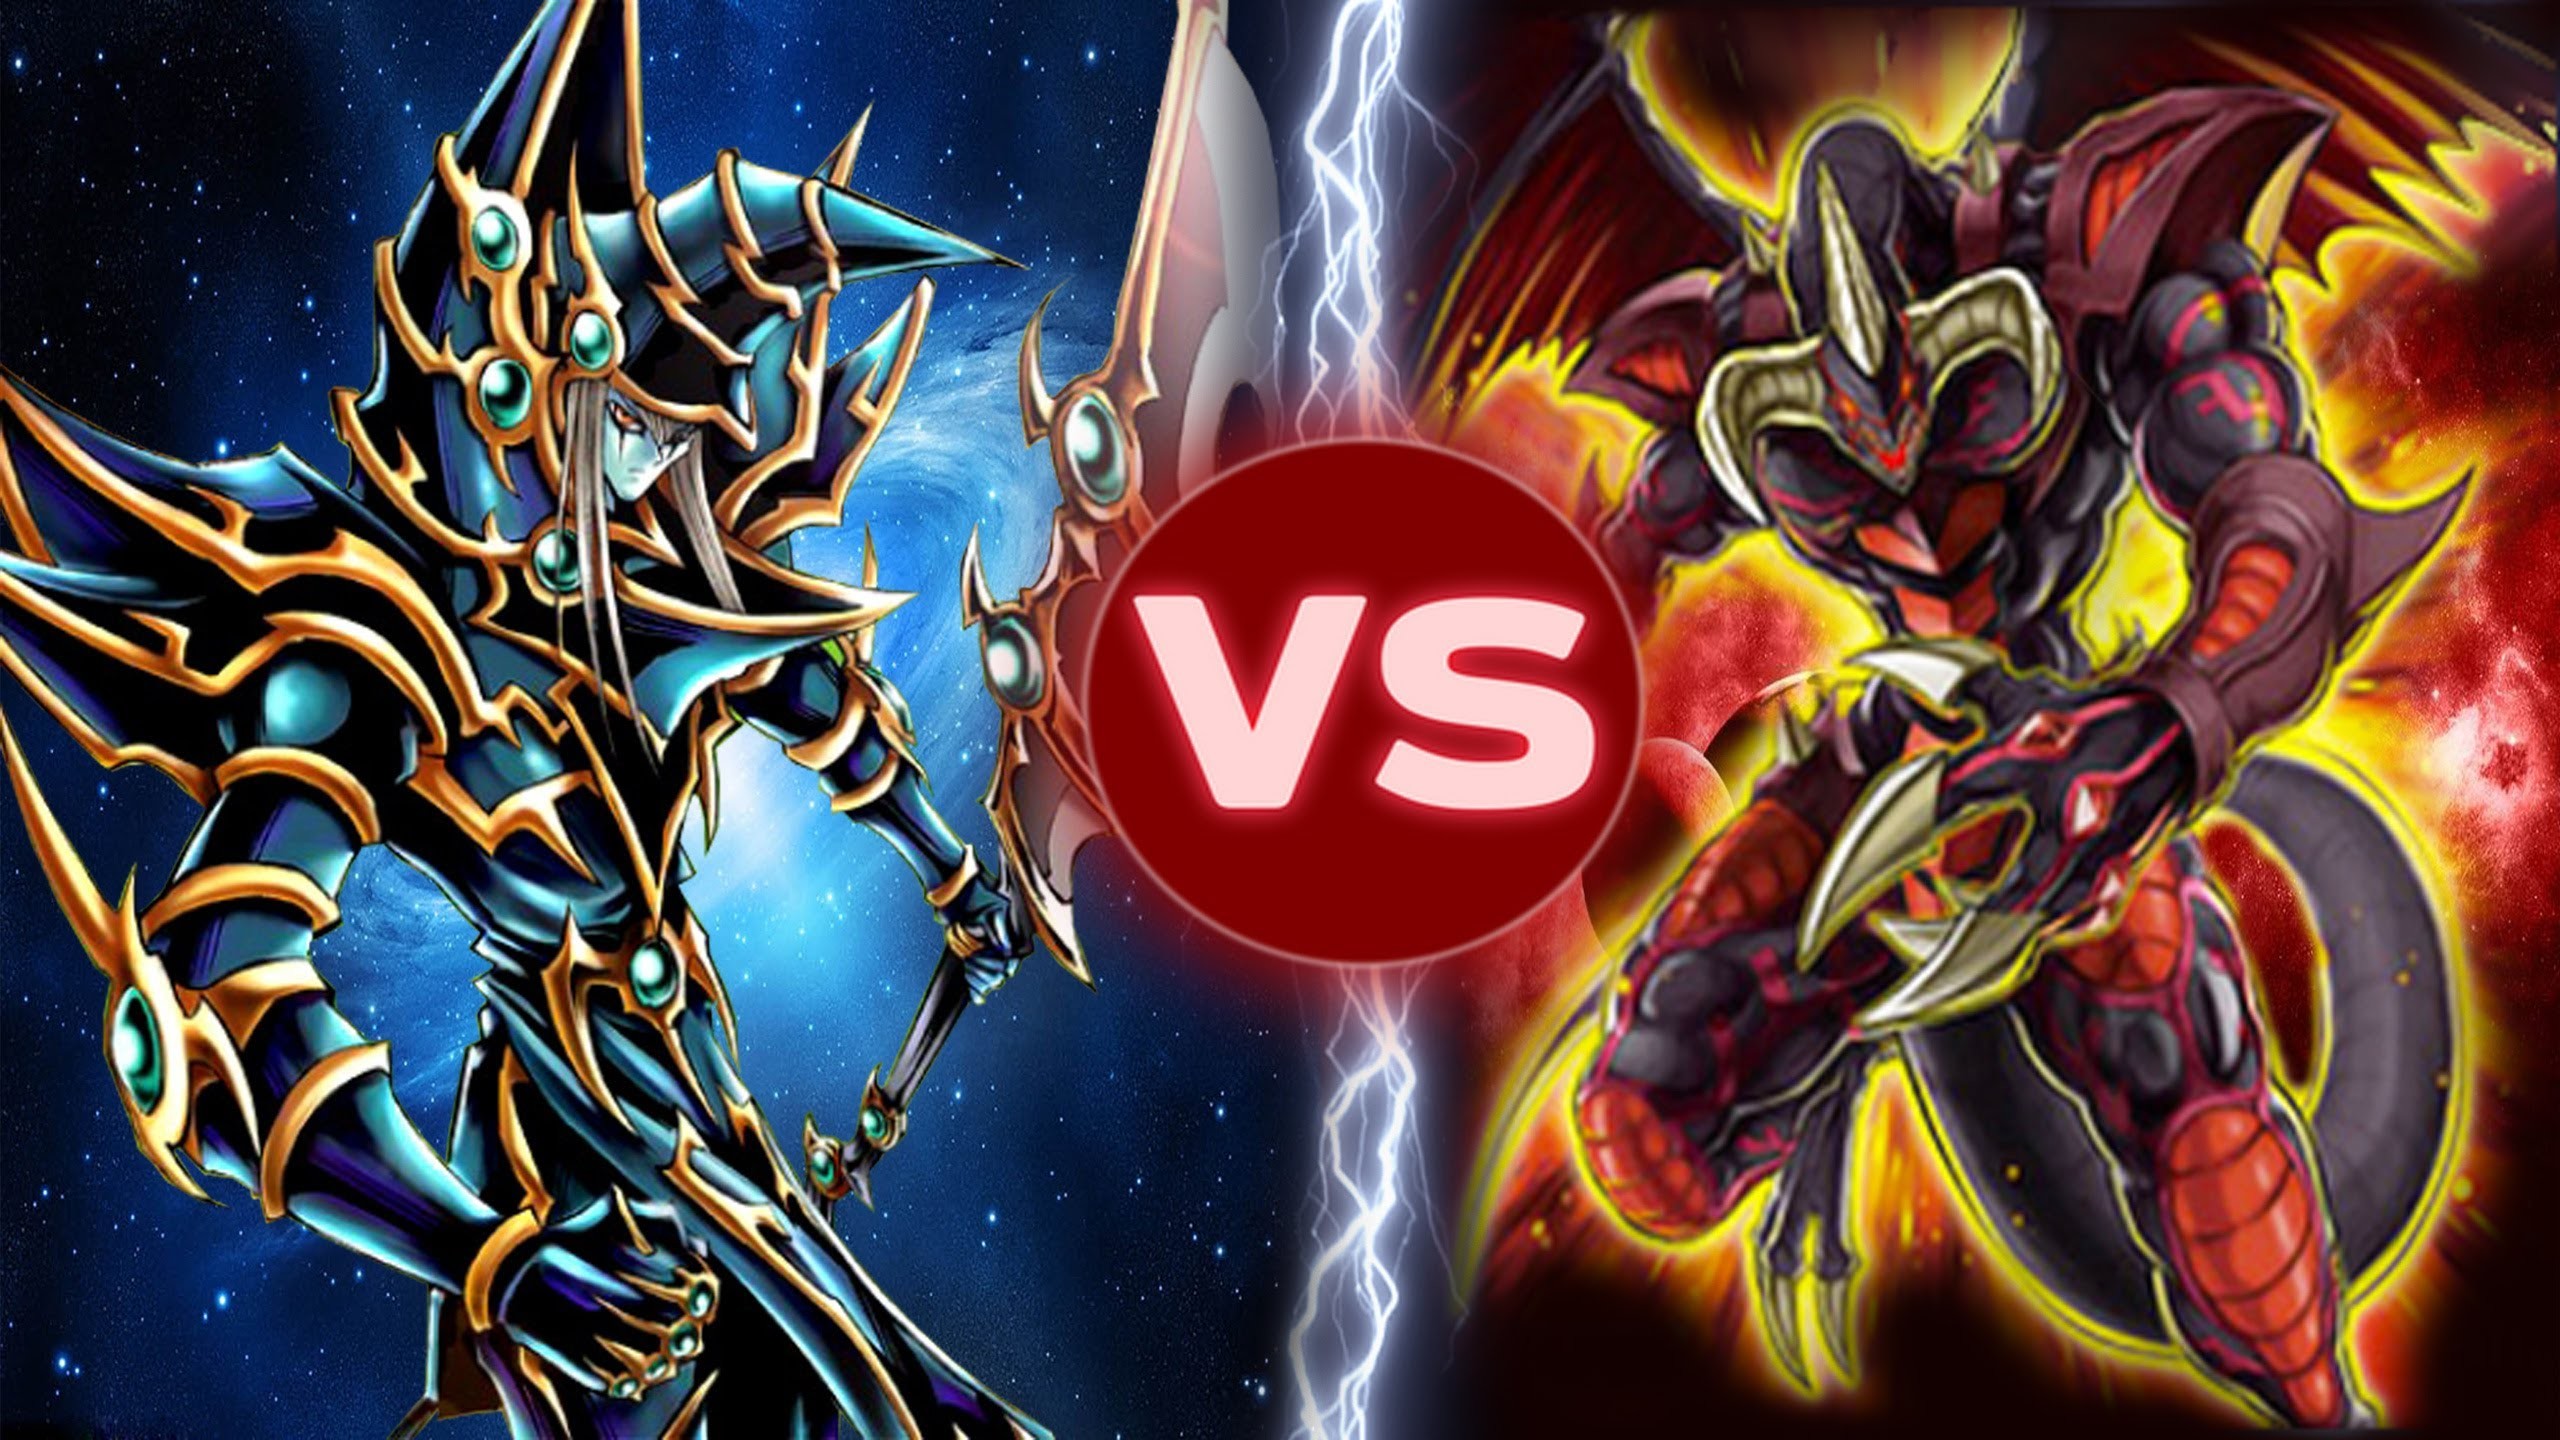 2560x1440 Yugioh Duel - Dark Paladin Vs Jeweled Red Dragon Archfiend October 2013!! -  YouTube